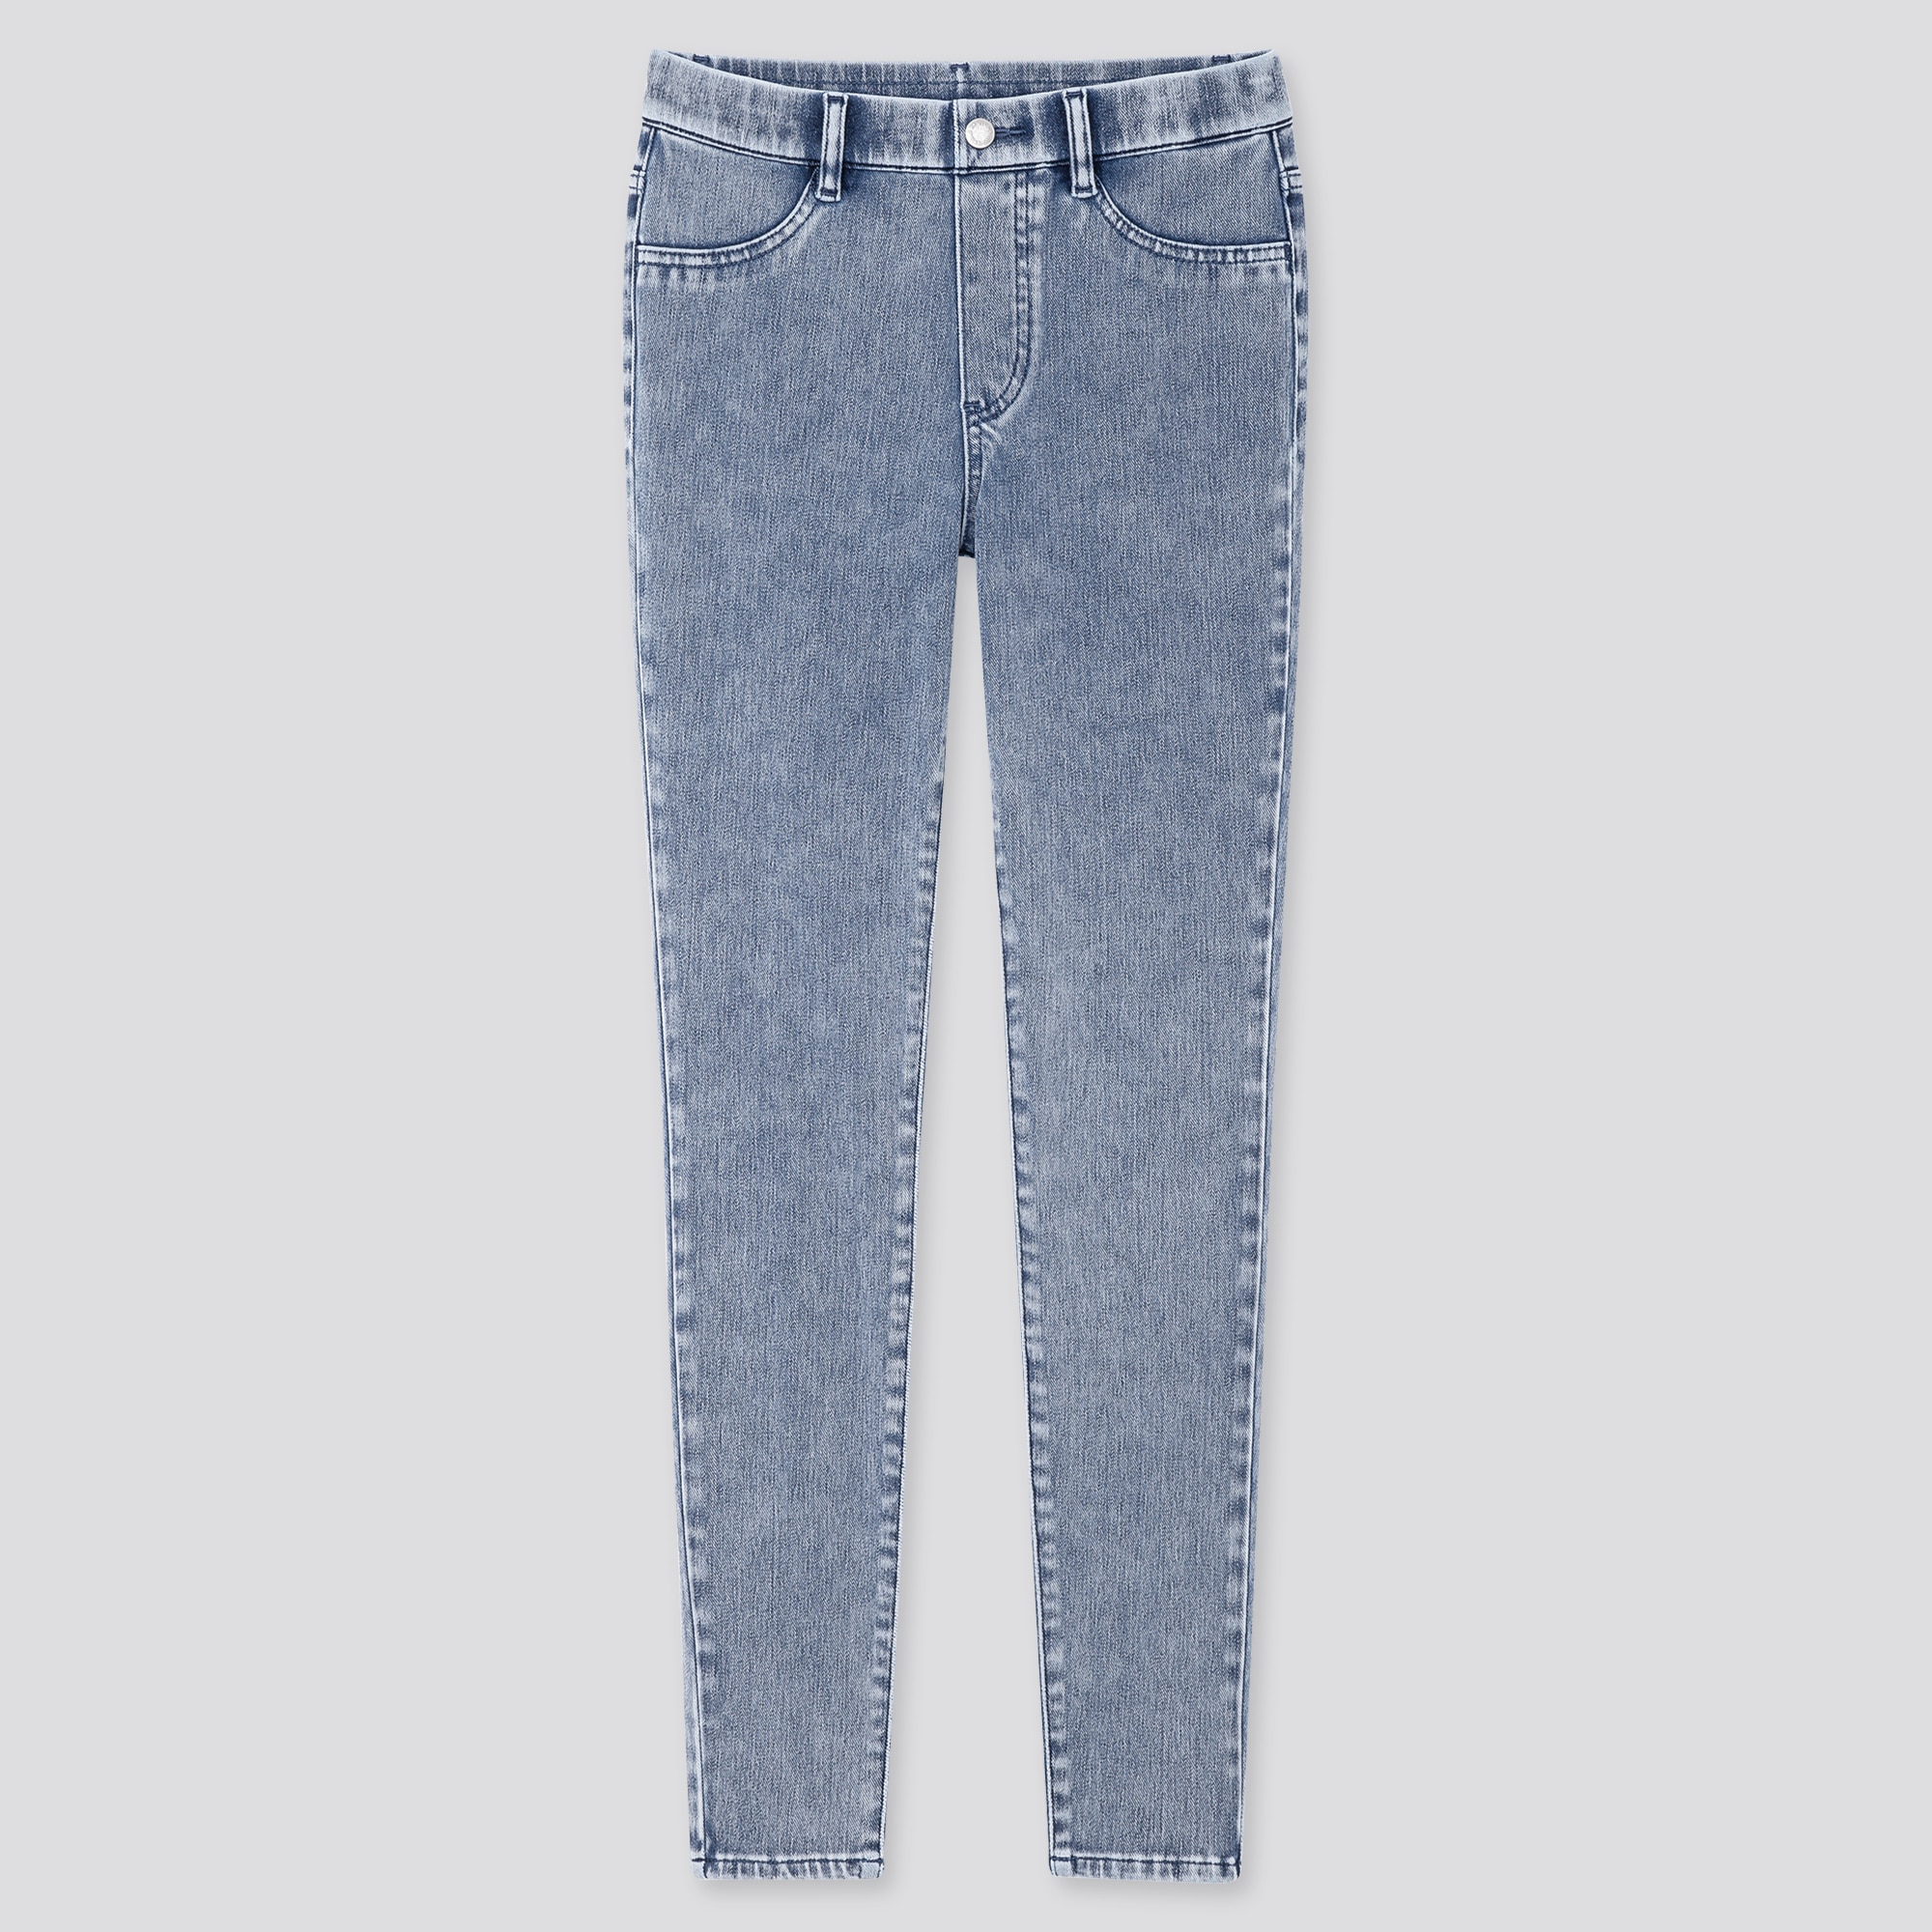 Uniqlo Ultra Stretch Denim Leggings Pants  International Society of  Precision Agriculture